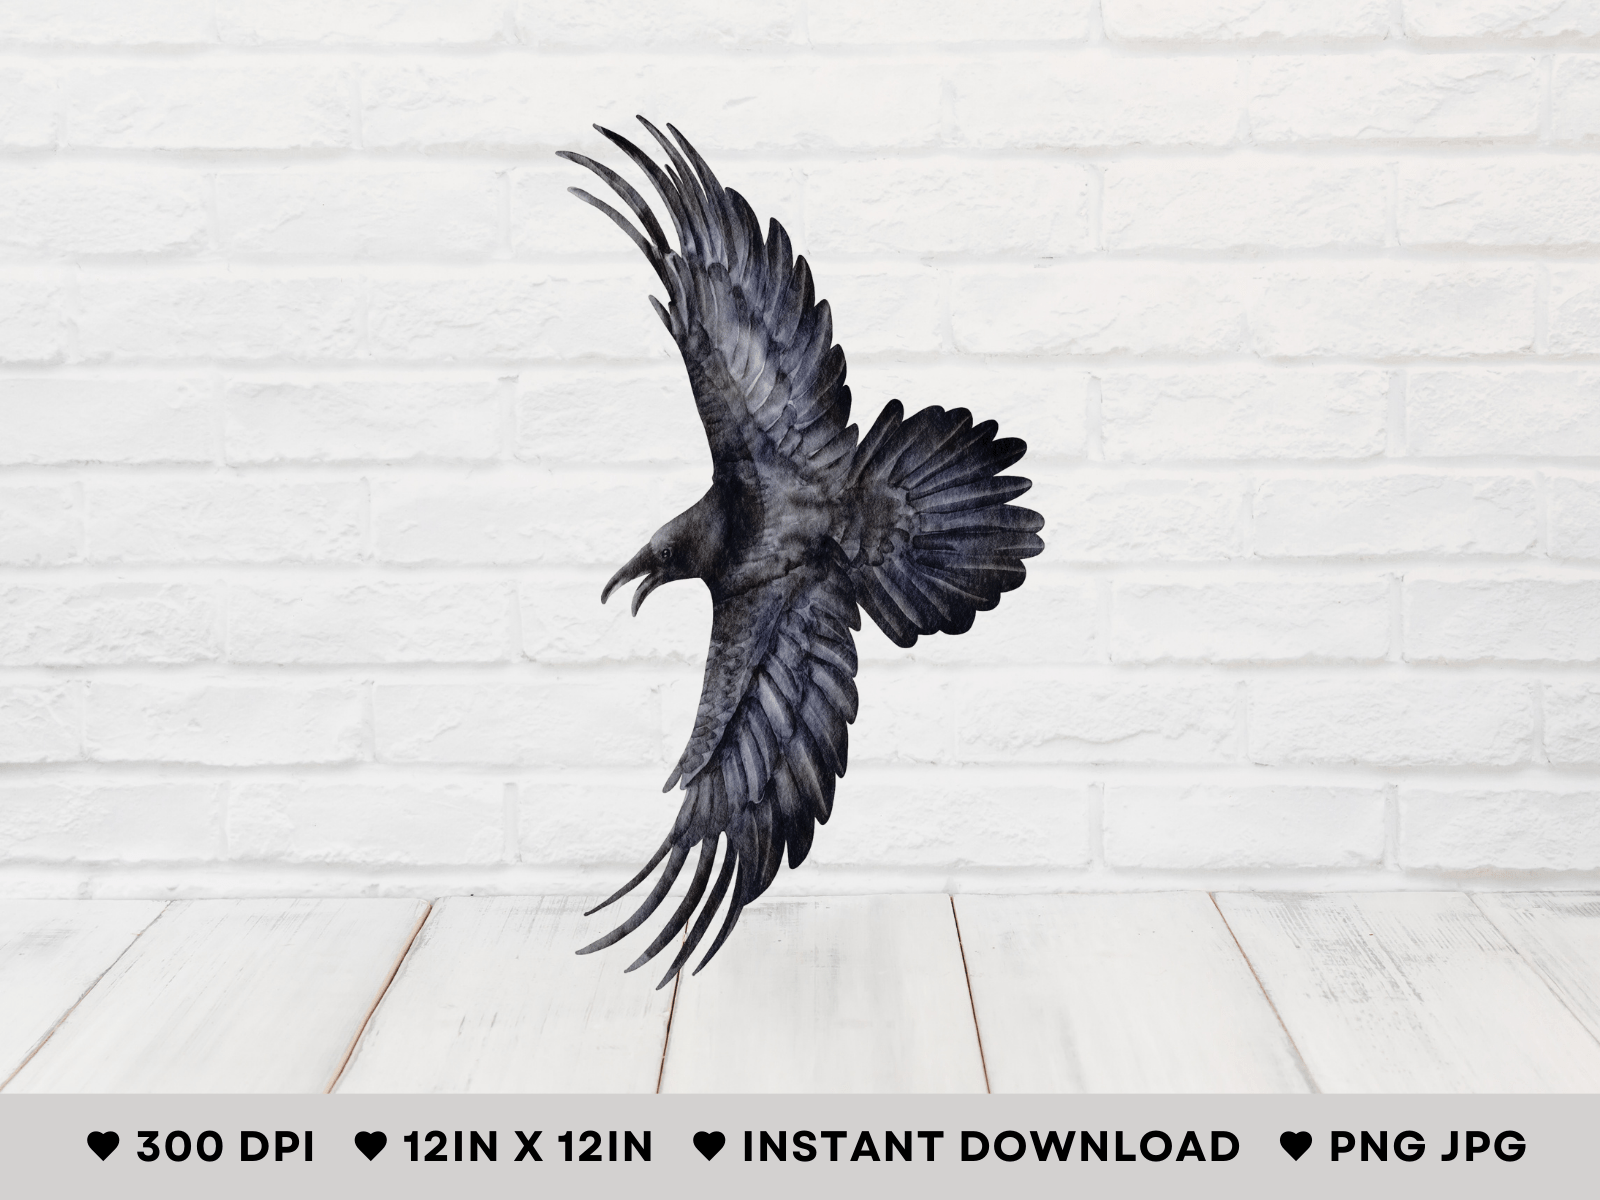 Flying Crow Watercolor Illustration Free